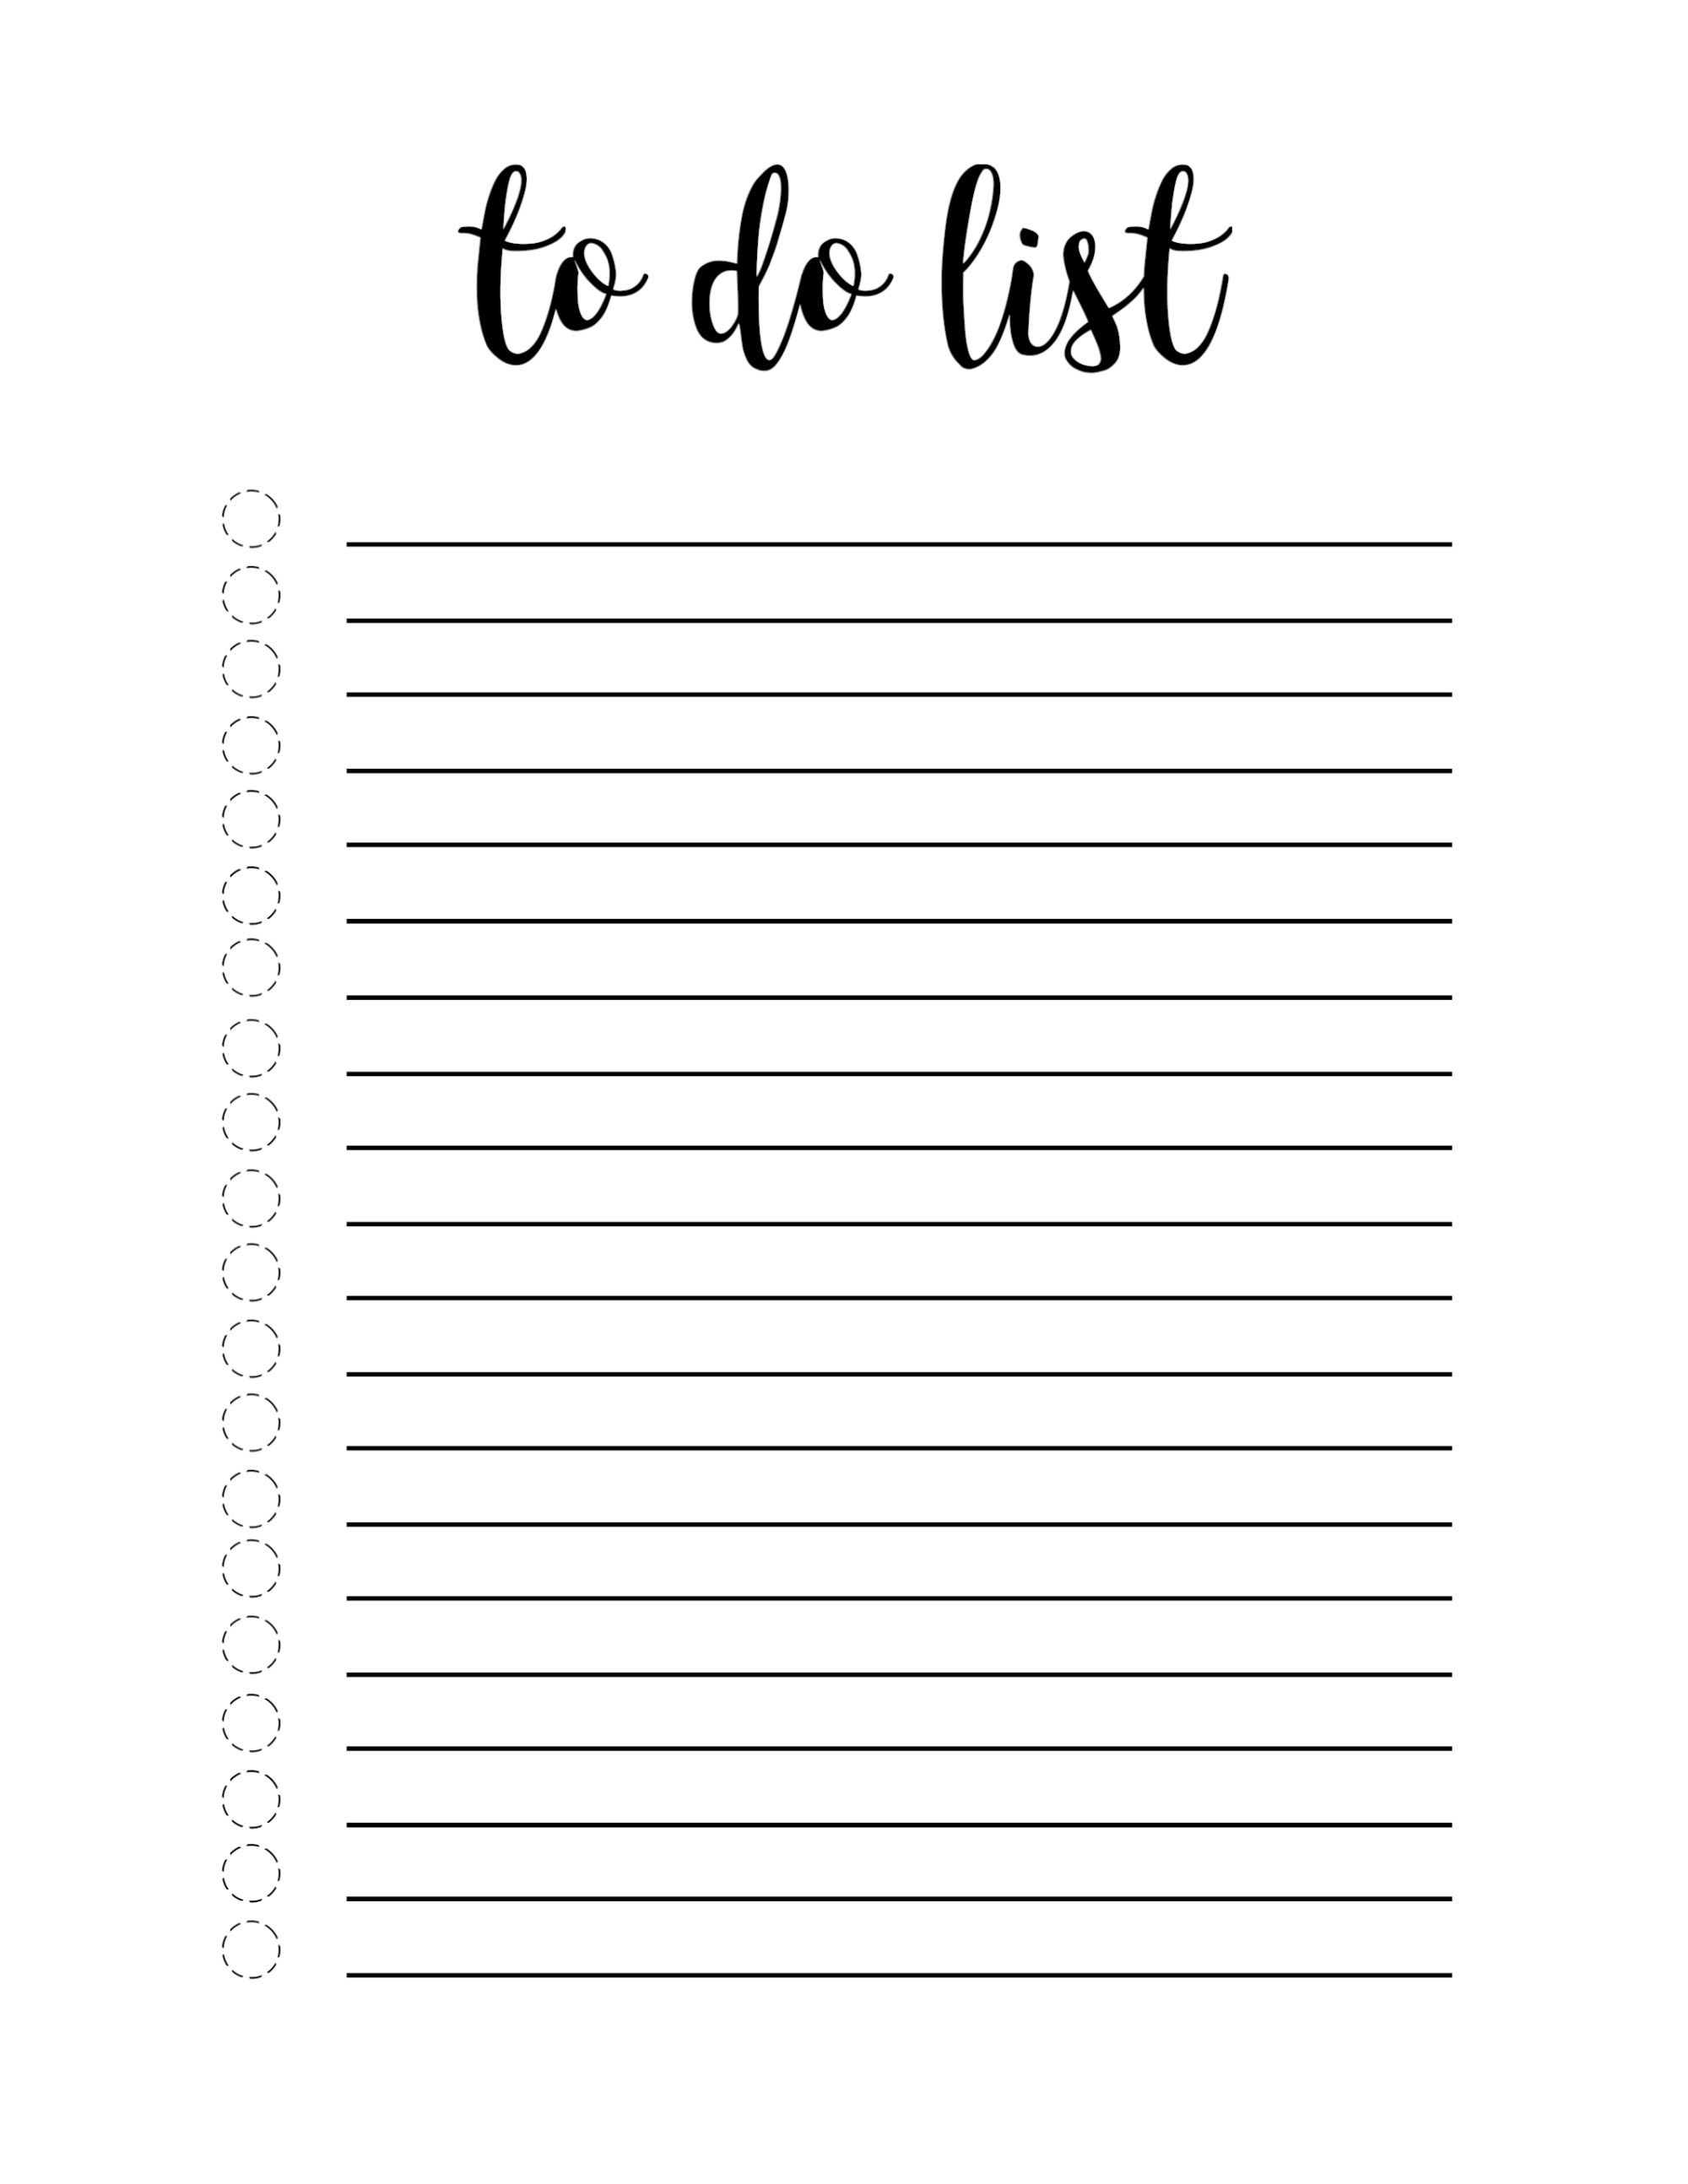 Free Printable To Do List Template | Making Notebooks | Pinterest - Free Printable To Do List